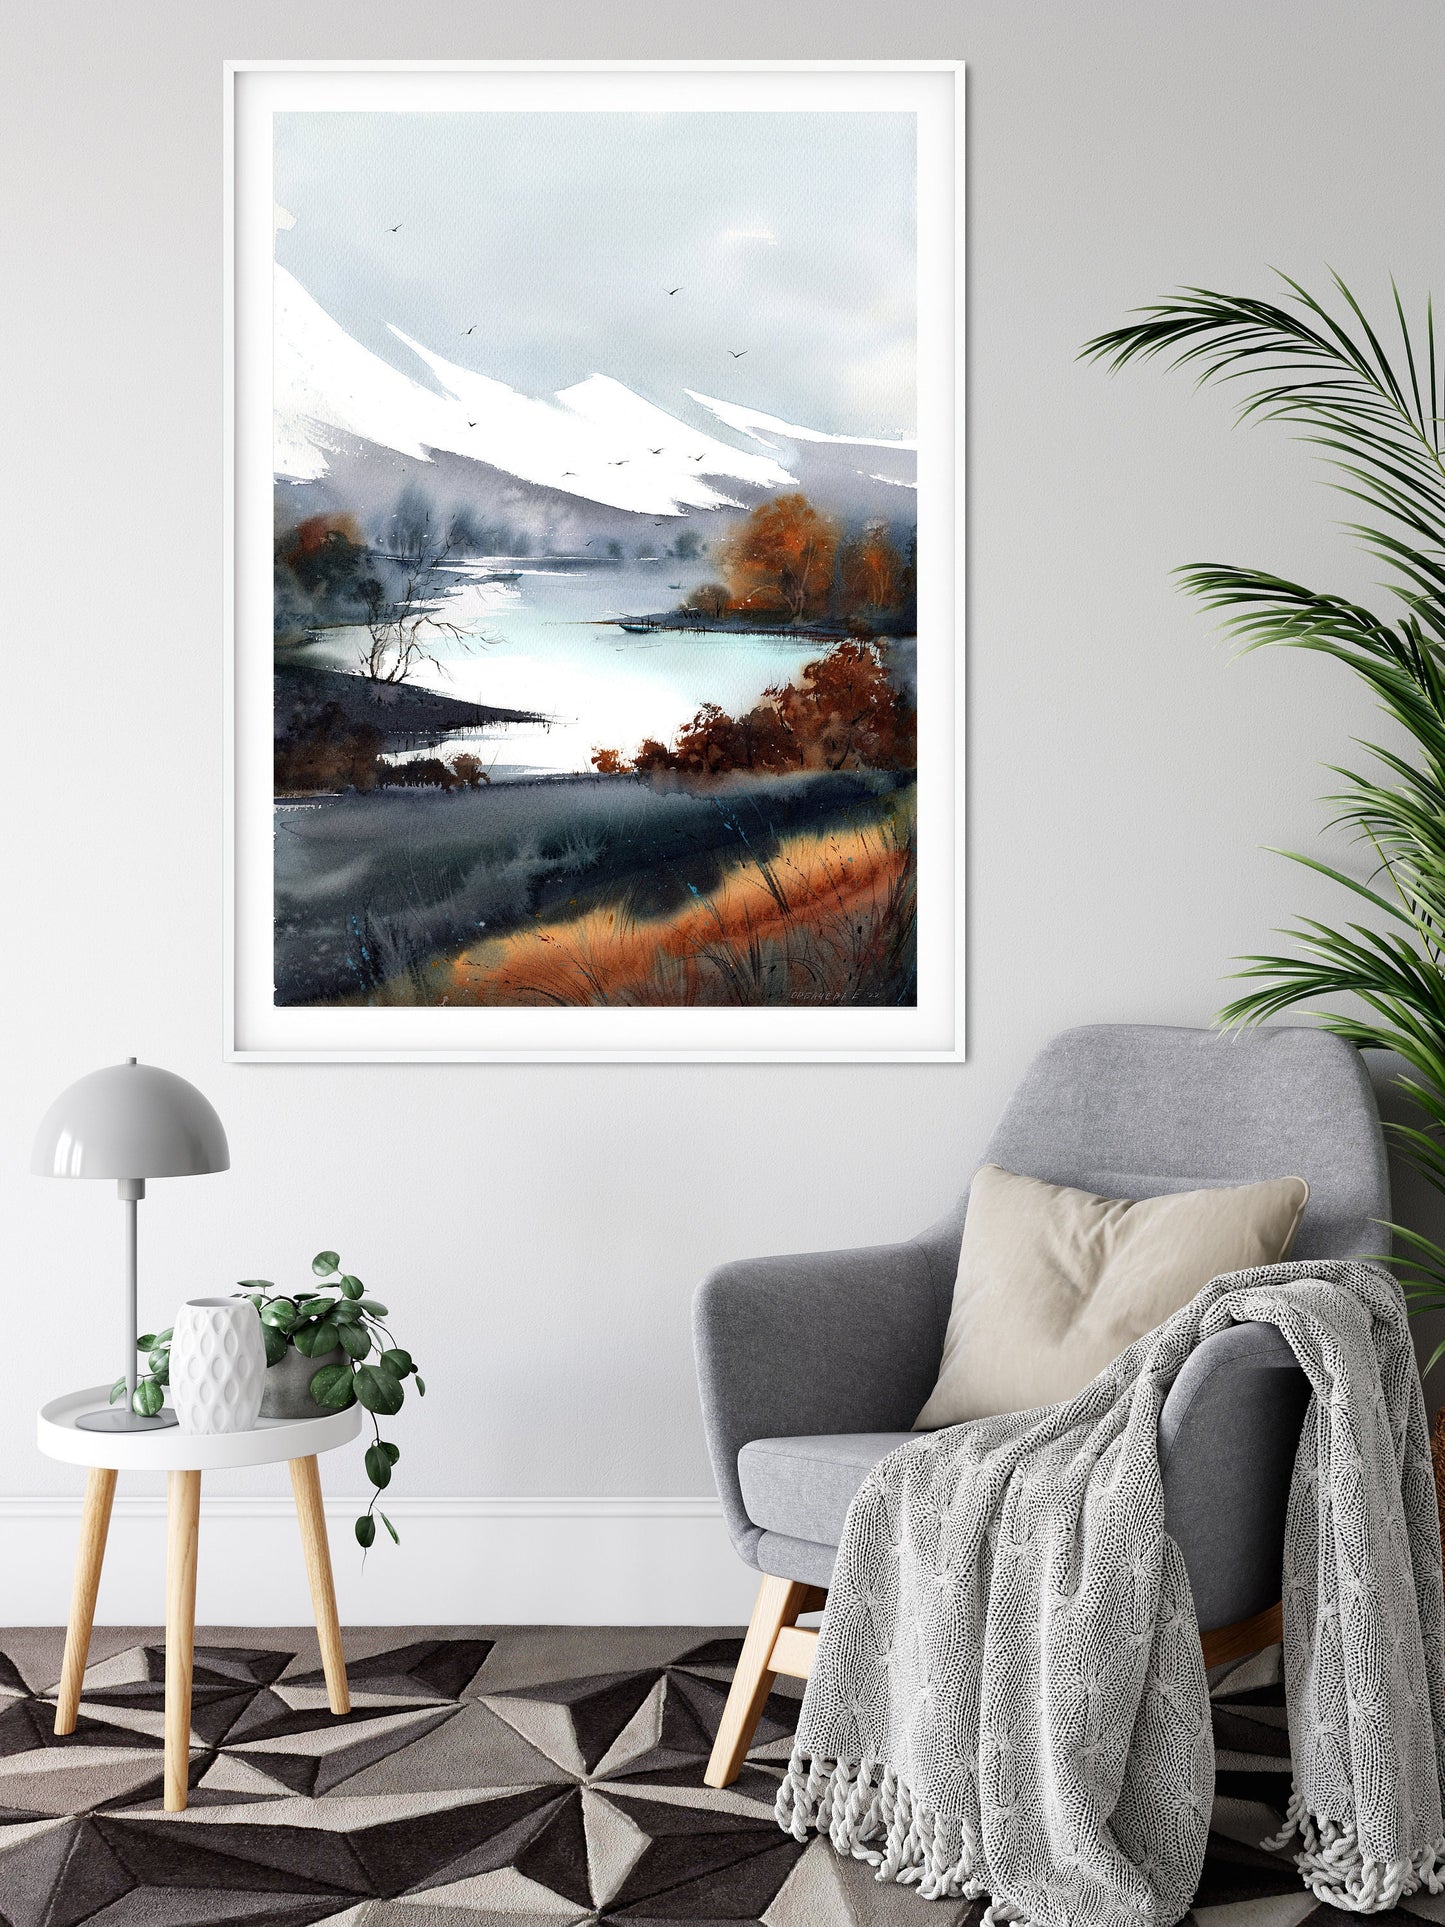 Abstract Nature Print, Mountain Art, Watercolor Landscape, Canvas Painting, Modern Living Room Wall Decor, Grey